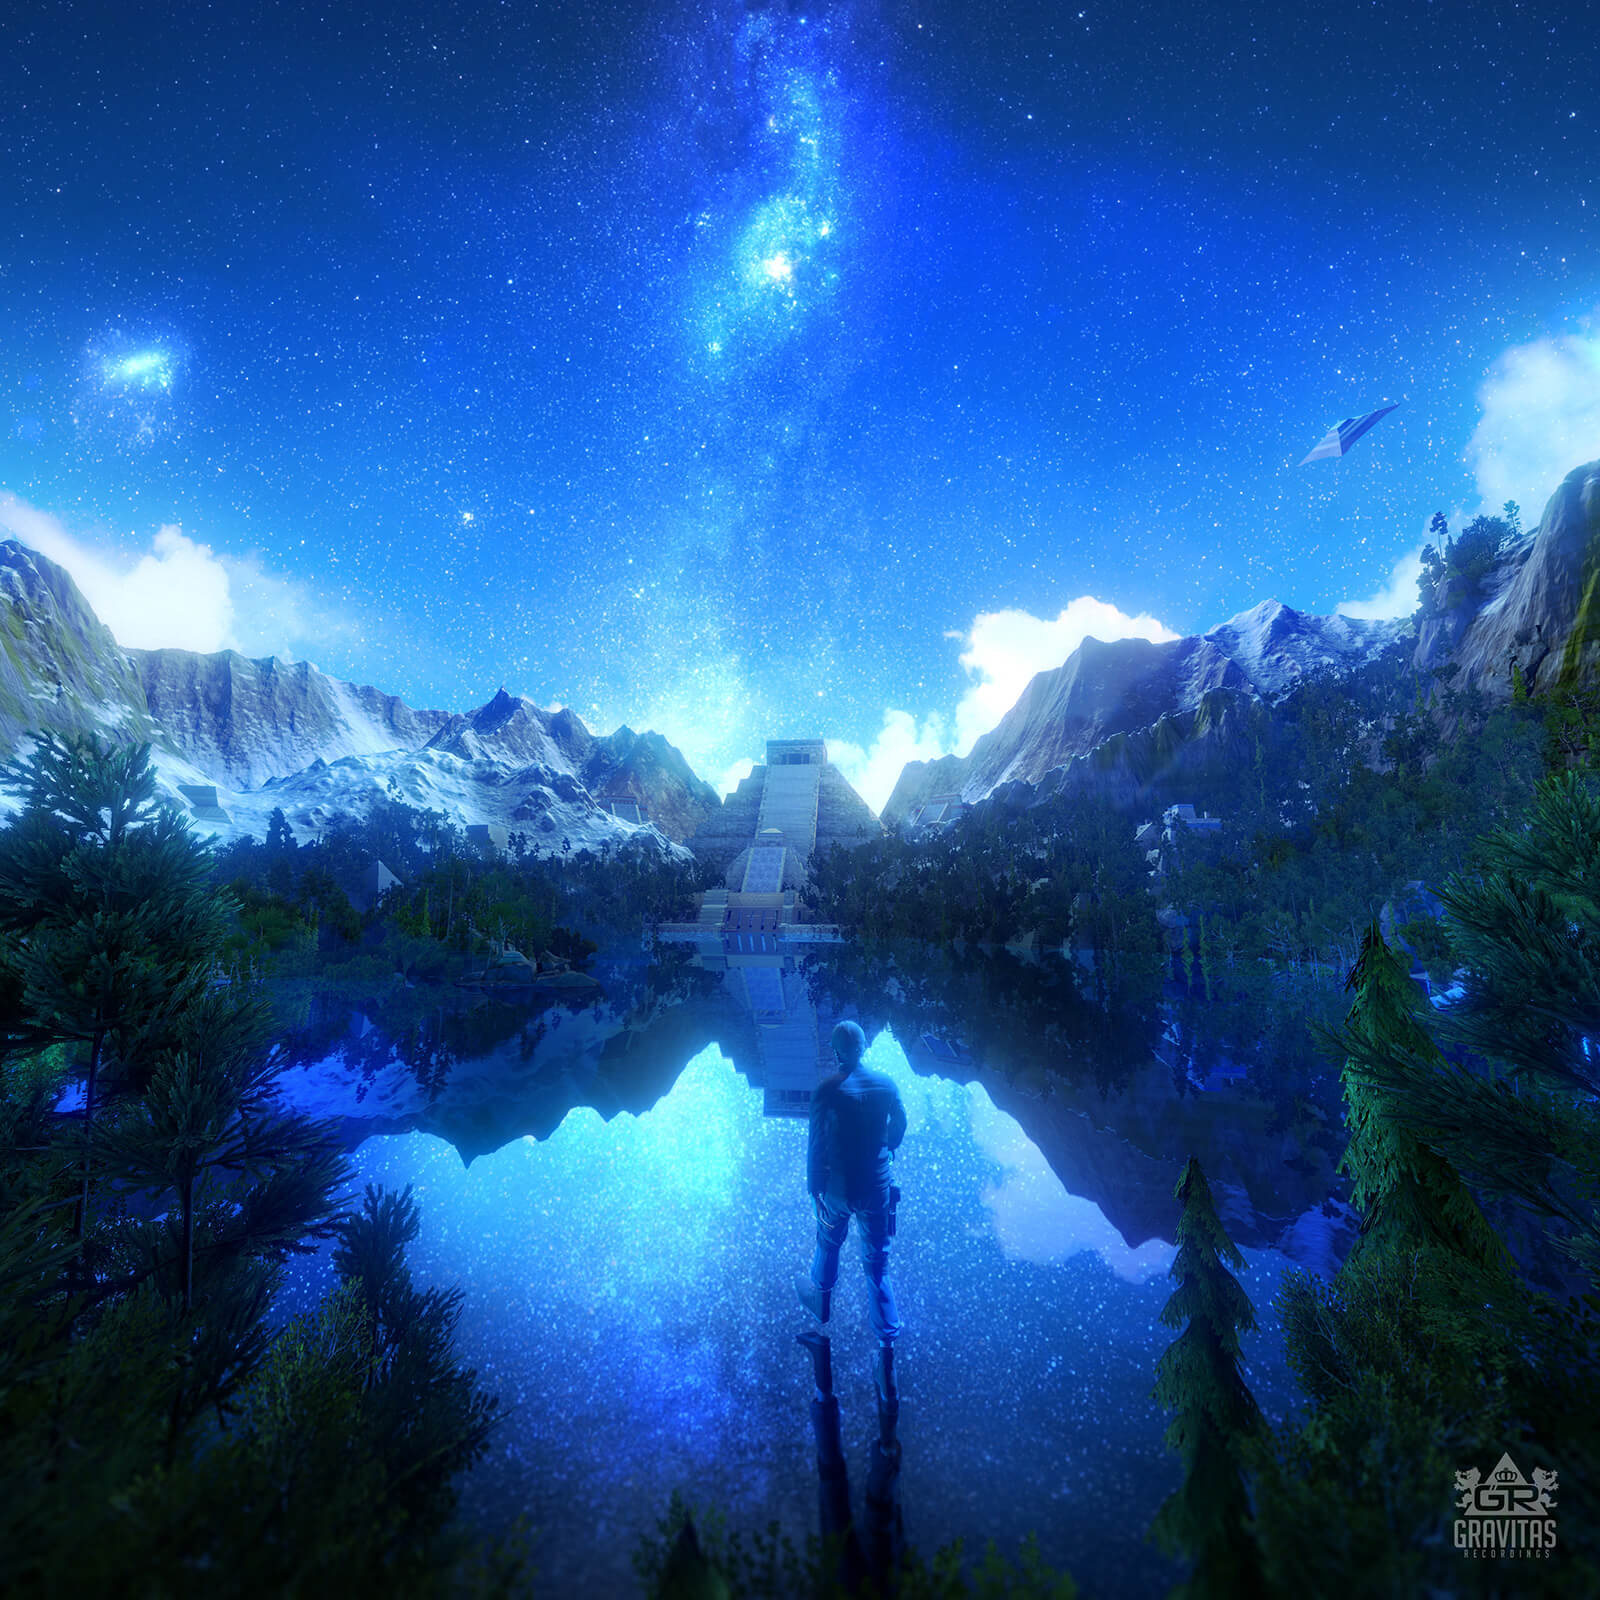 Walking in the Stars Cover Art and Animation by Axon Genesis